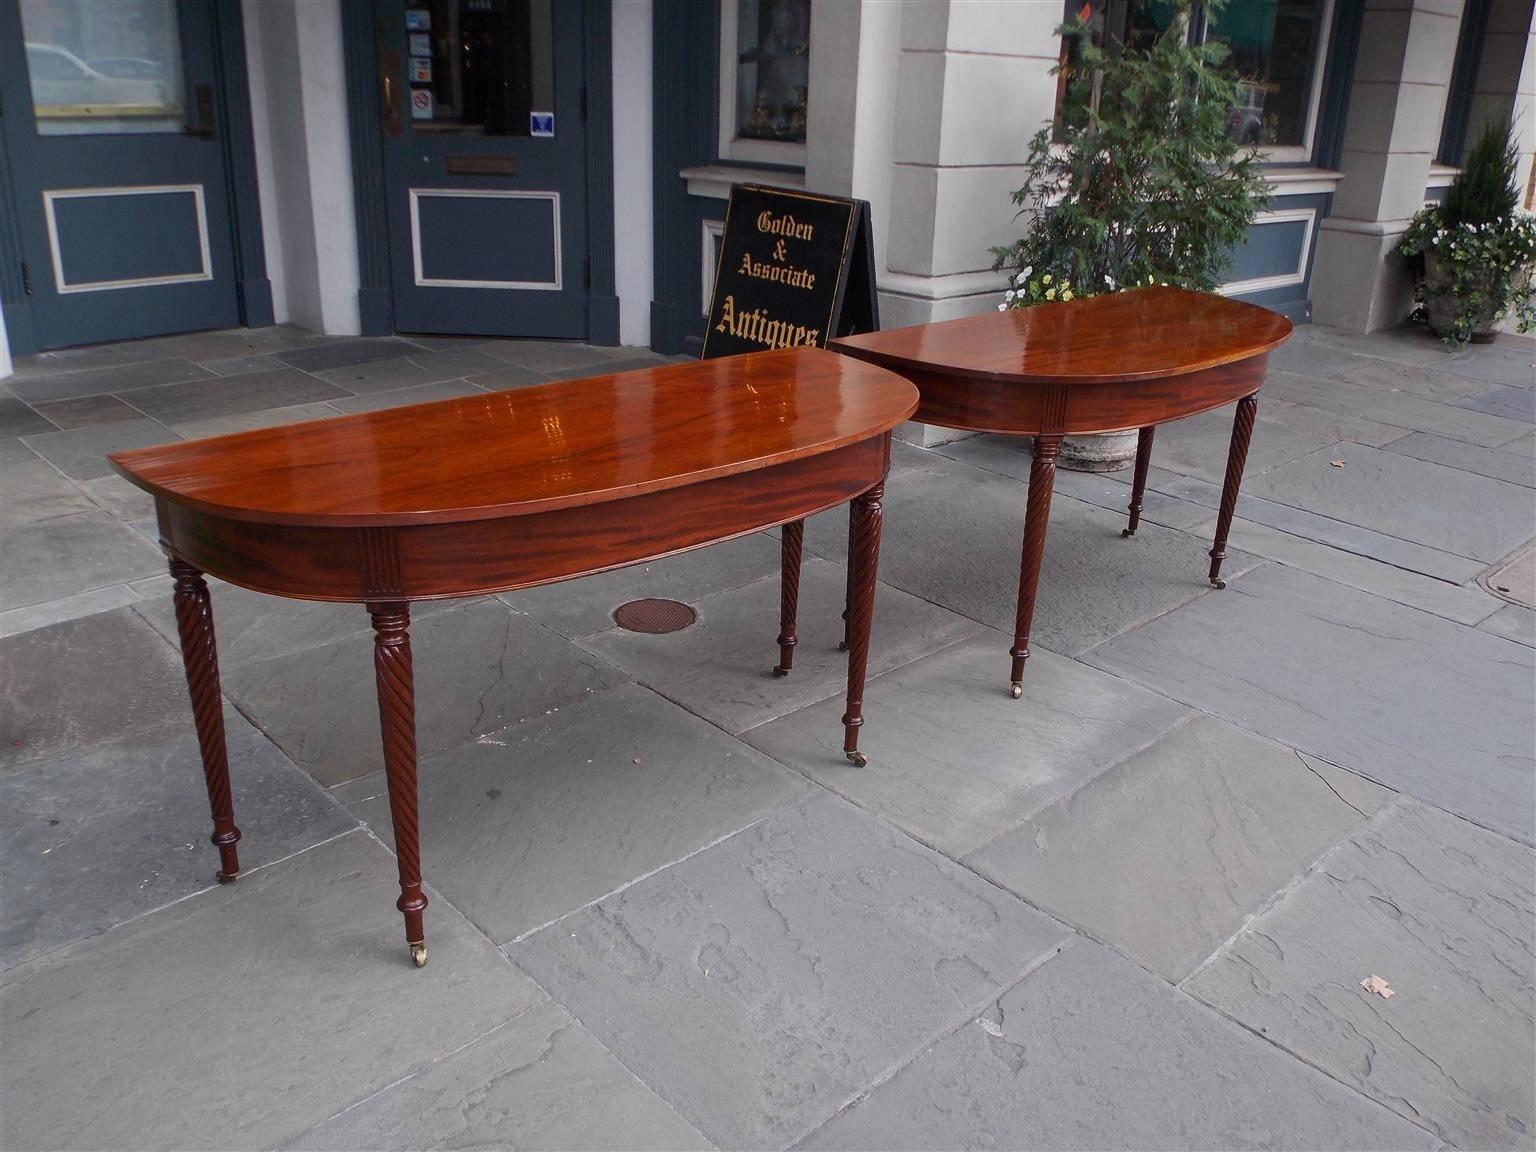 Pair of American Regency mahogany D-ends with one board tops, carved molded skirts, fluted corners, terminating on turned ringed barley twist legs with the original brass casters, Early 19th Century.